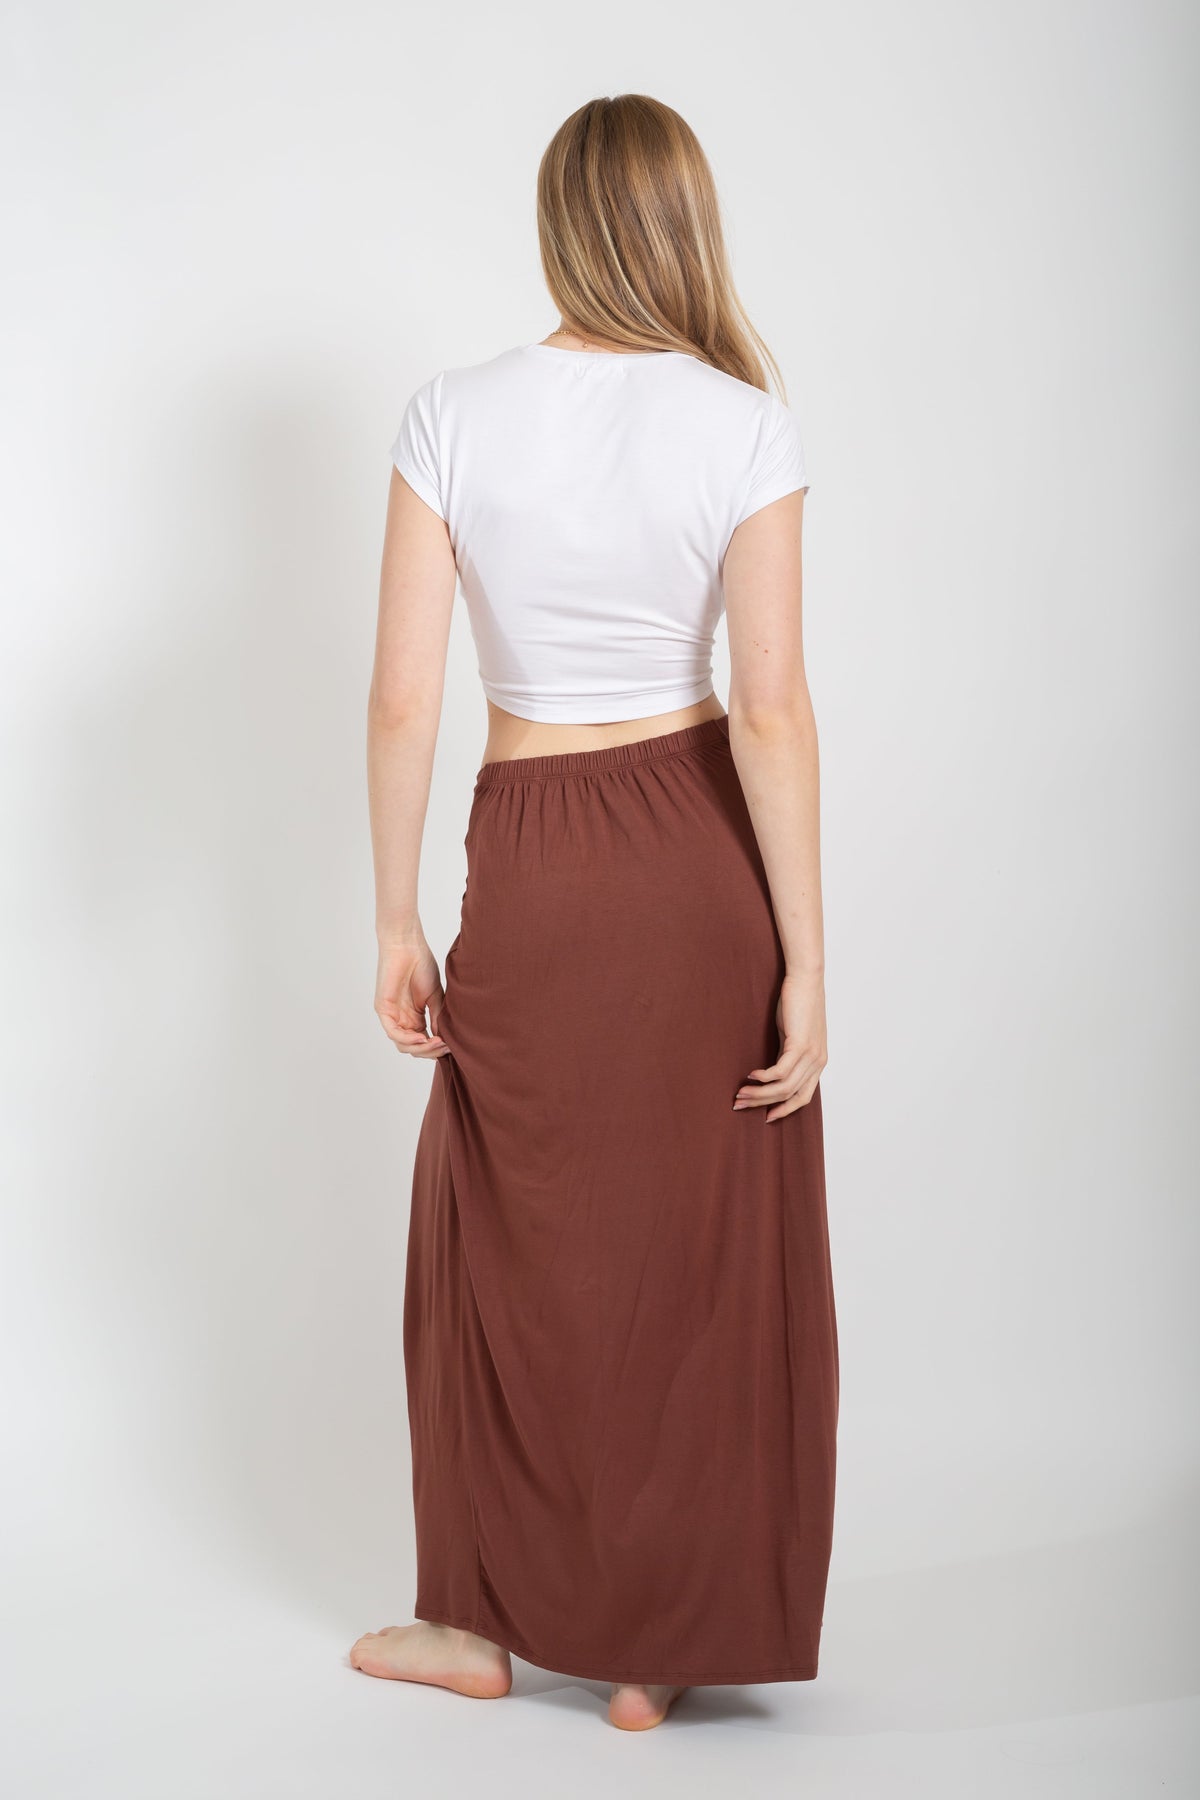 Blonde model wearing mocha brown laguna side knot maxi slit skirt facing back. Paired with Laguna knot top in white from Koy Resort. Koy Resort vacation cruise wear.